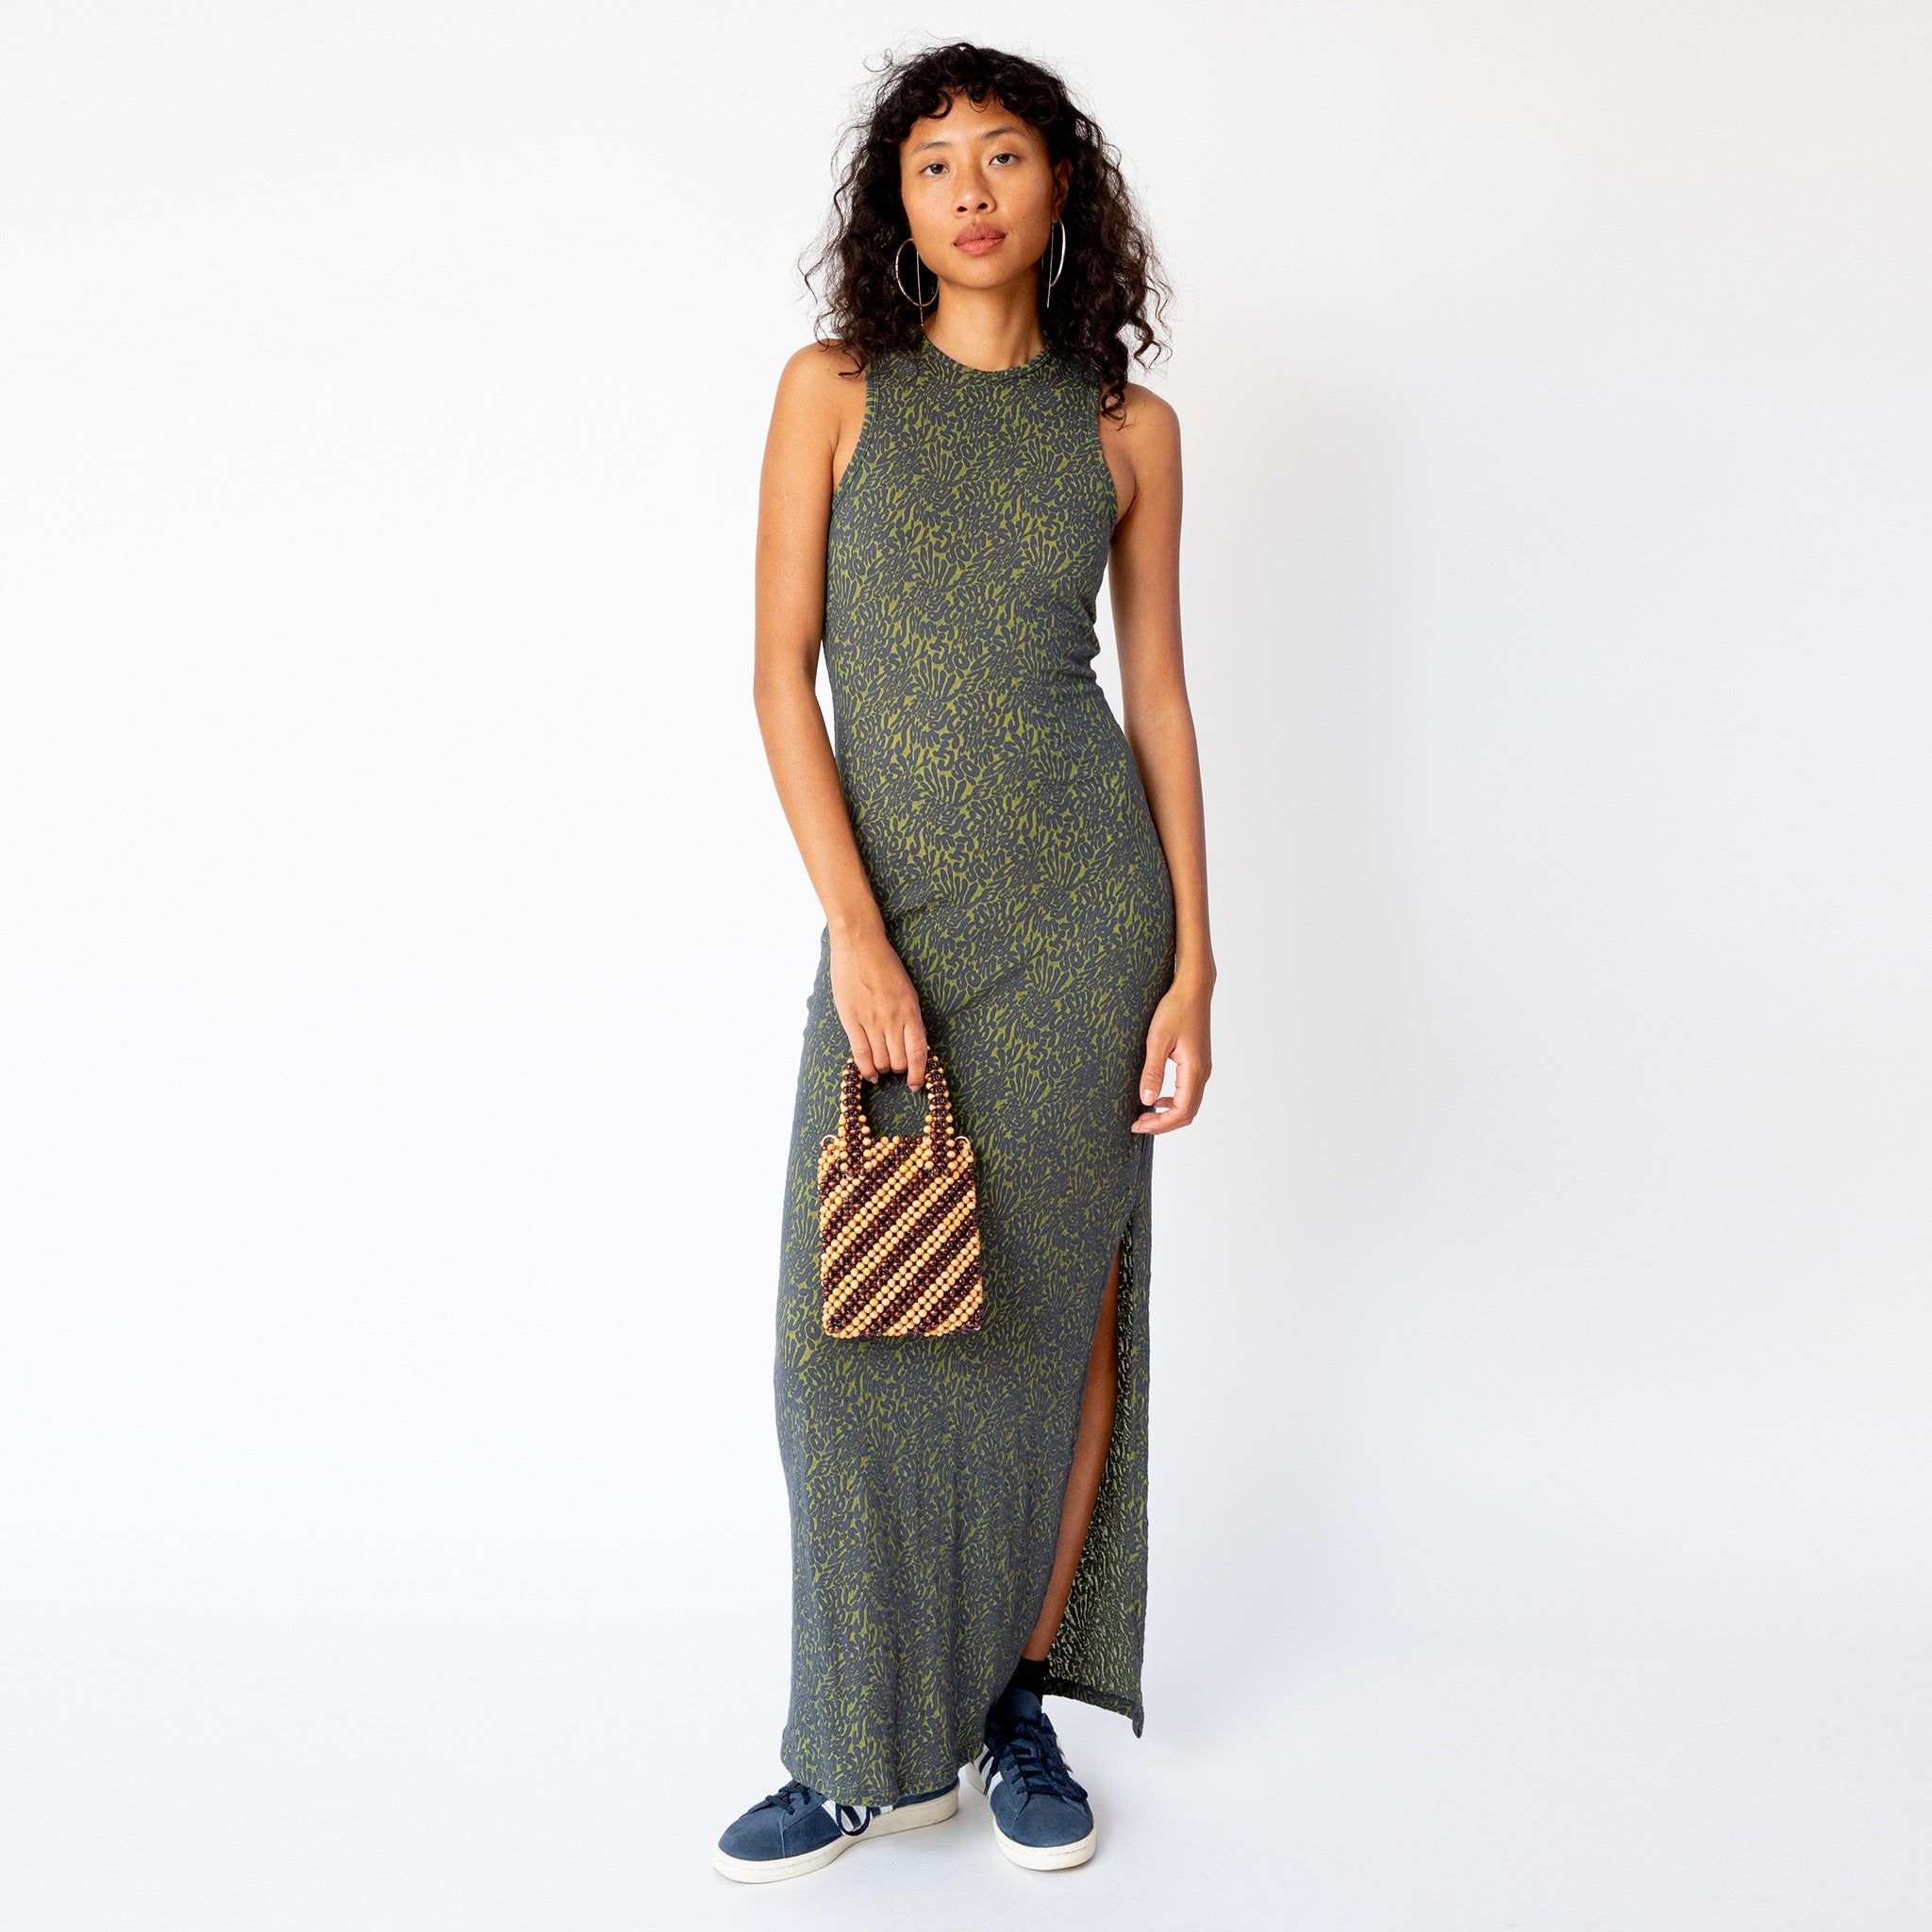 A model wears the form-fitting Shrunk Dress by Eckhaus Latta, a sleeveless full length casual dress in a green printed pattern, full outfit view.